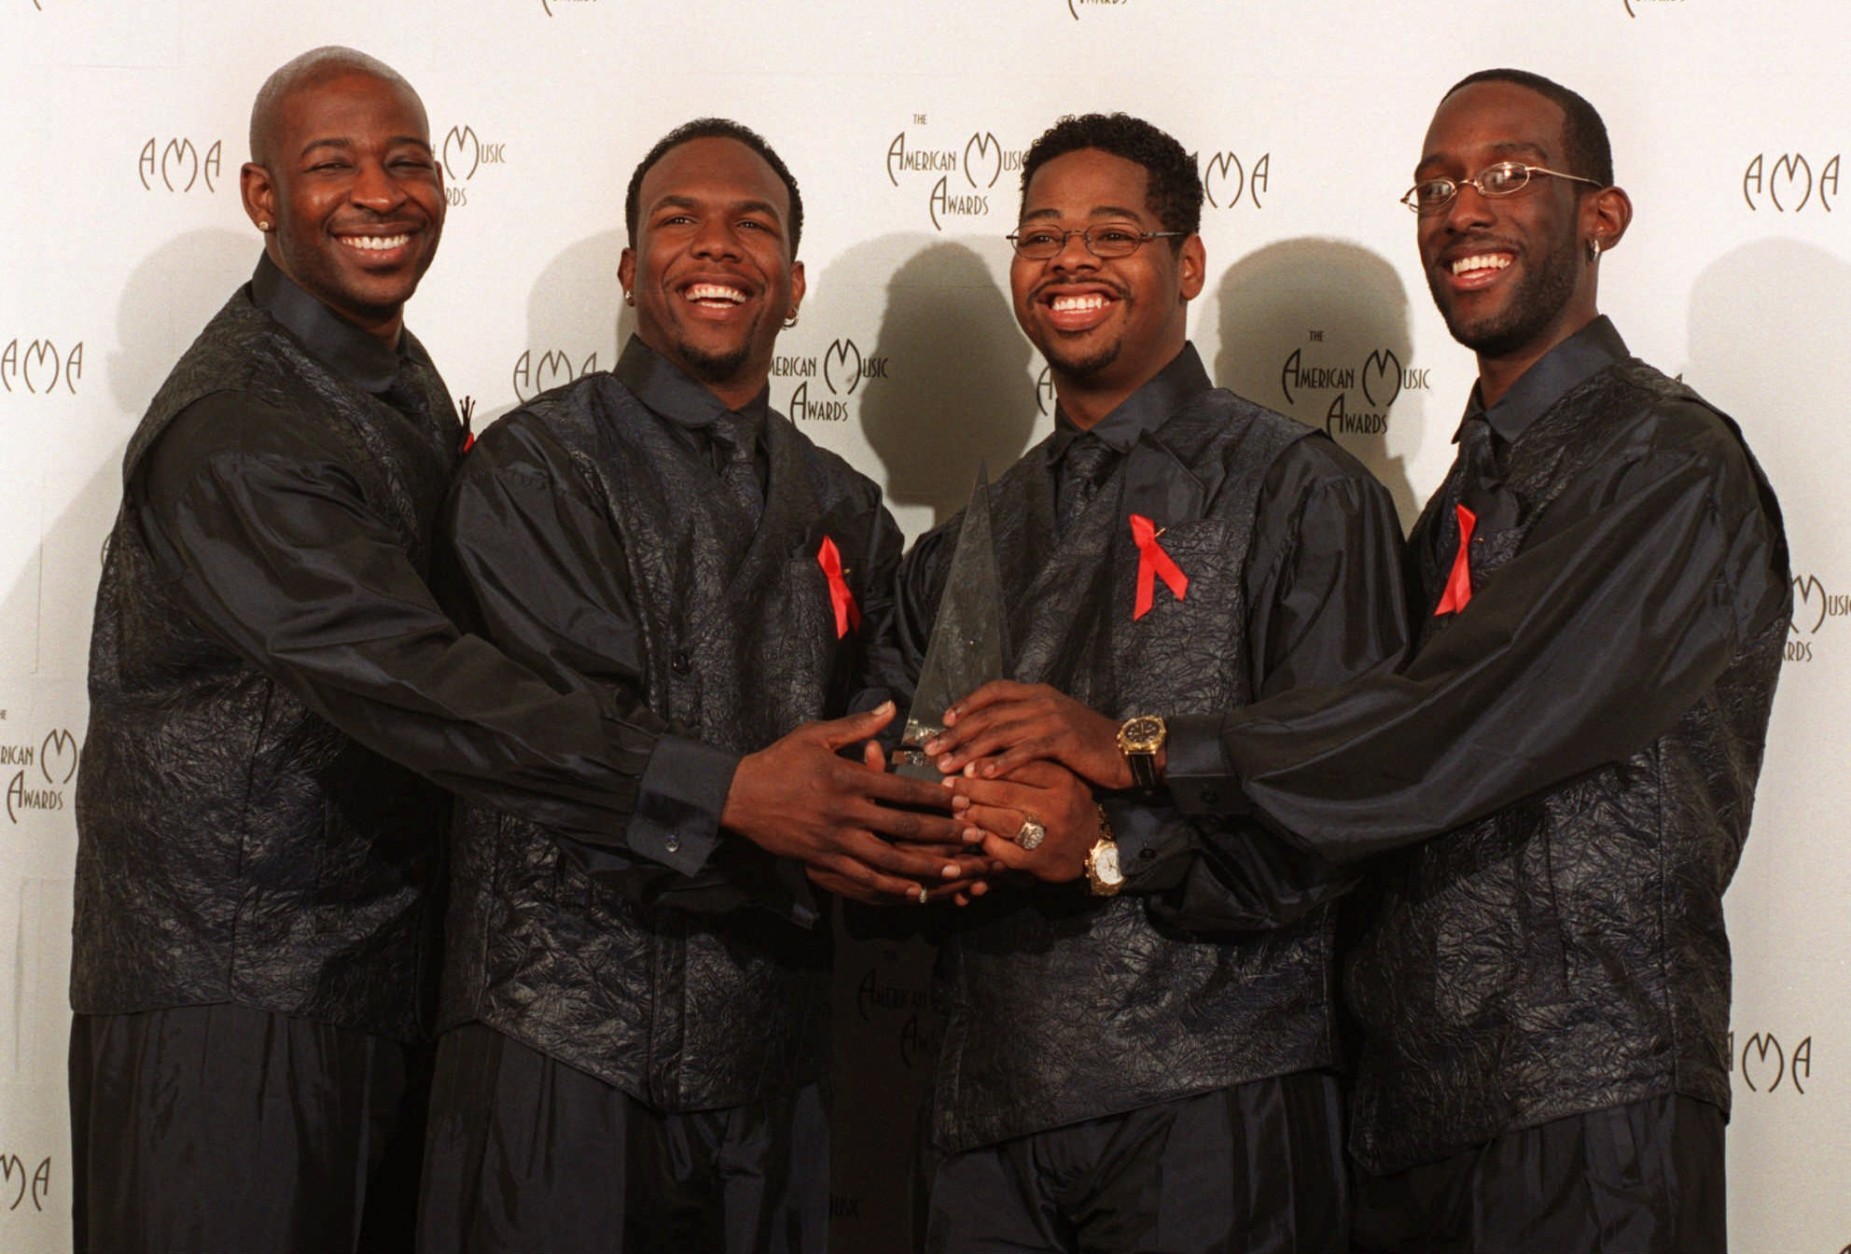 Members of Boyz II Men are shown after winning the award for Best Soul/Rhythm and Blues Group at the 25th annual American Music Awards at the Shrine Auditorium in Los Angeles, Monday, Jan. 26, 1998.  The band members are Michael McCary, Nathan Morris, Wanya Morris and Shawn Stockman. (AP Photo/Michael Caulfield)